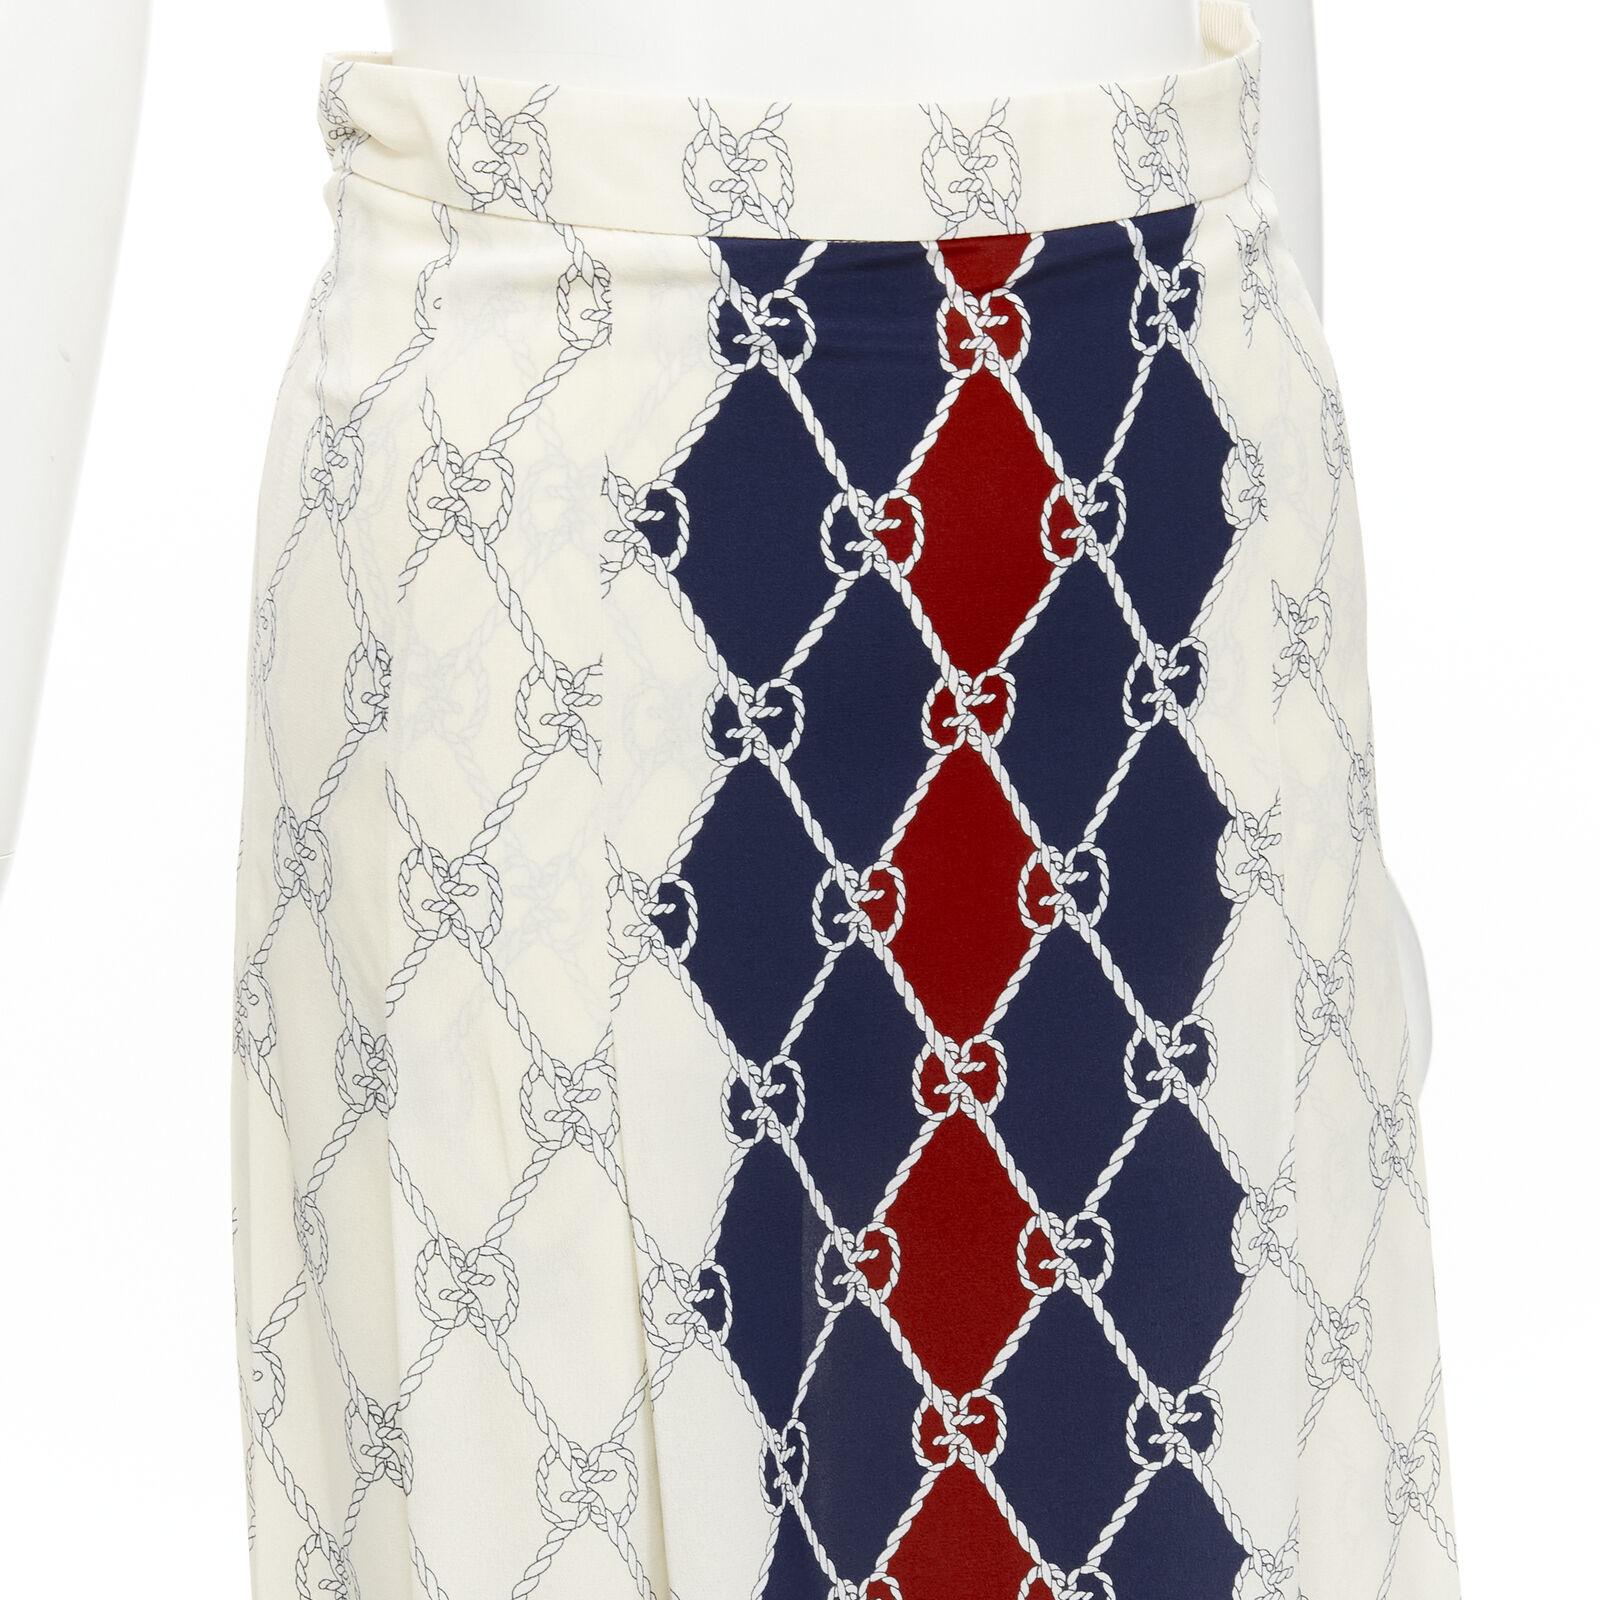 GUCCI 100% silk blue red Rhombus GG Supreme rope monogram pleated skirt IT38 XS
Reference: AAWC/A00391
Brand: Gucci
Designer: Alessandro Michele
Material: 100% Silk
Color: Ecru, Multicolour
Pattern: Monogram
Closure: Zip
Made in: